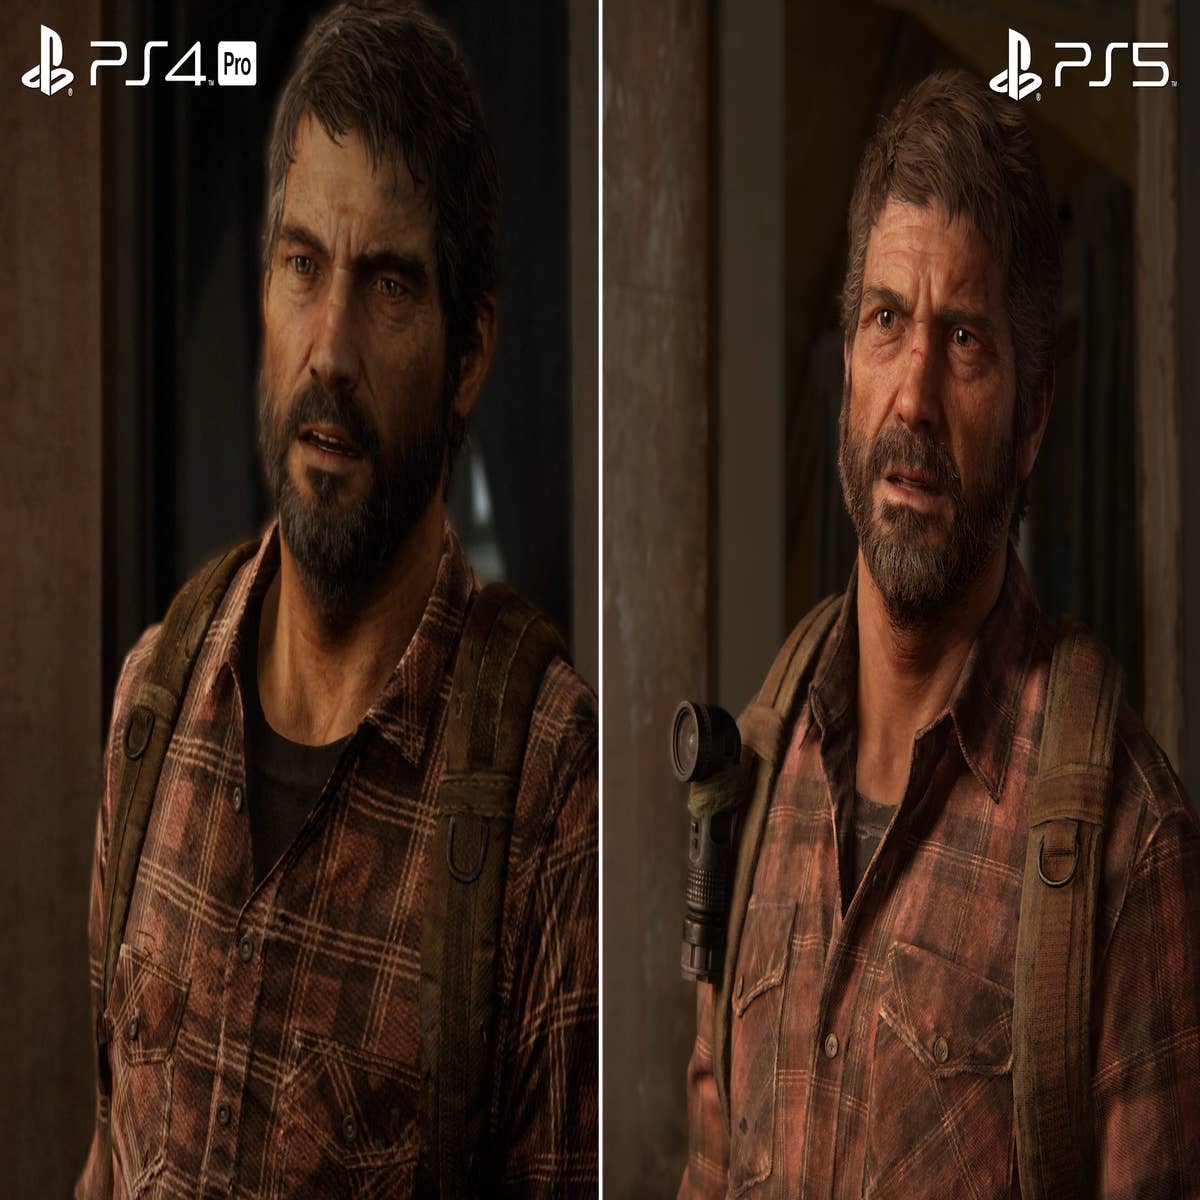 The Last of Us: PS3 vs PS4